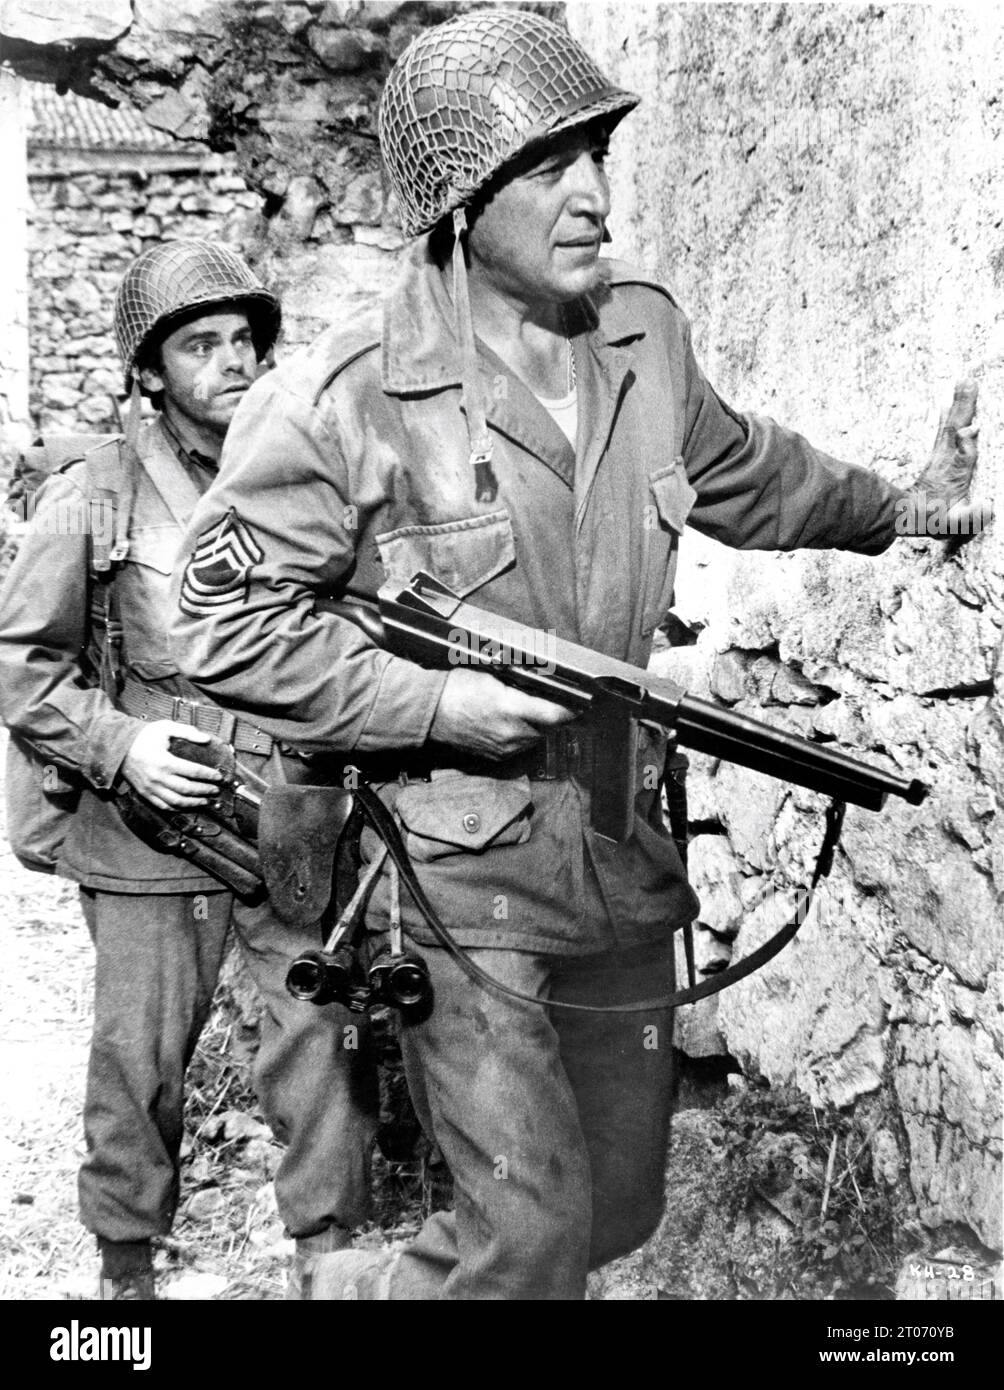 PERRY LOPEZ and TELLY SAVALAS in KELLY'S HEROES 1970 director BRIAN G. HUTTON writer Troy Kennedy-Martin music Lalo Schifrin Katzka-Loeb / Avala Film / The Warriors Company / Metro Goldwyn Mayer (MGM) Stock Photo